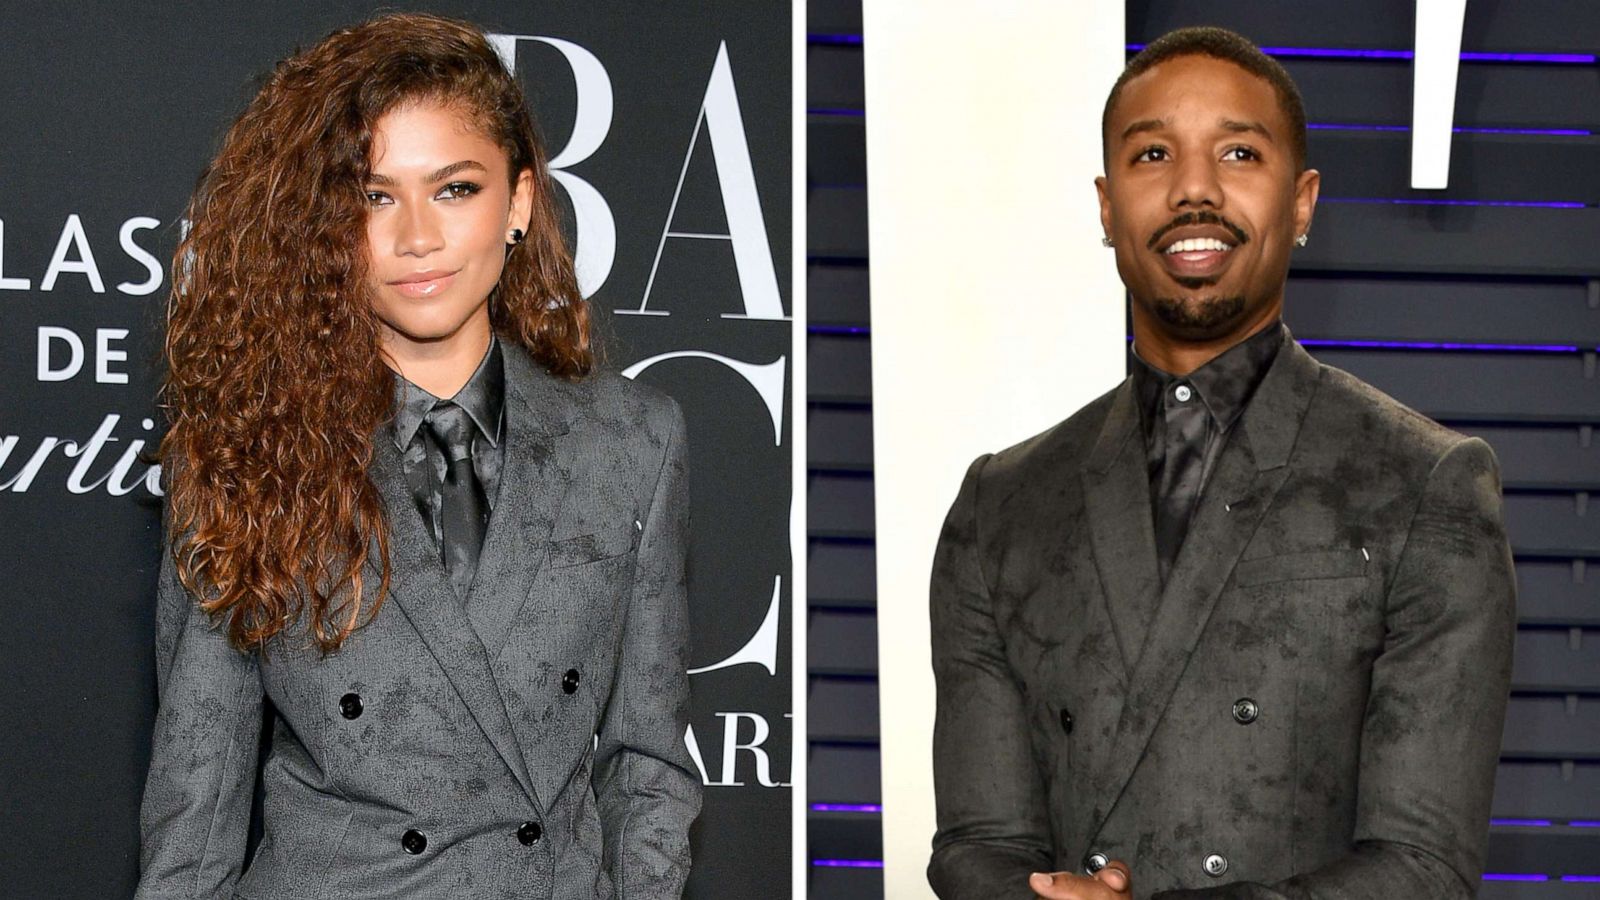 Zendaya wore the same suit as Michael B. Jordan and his comment on